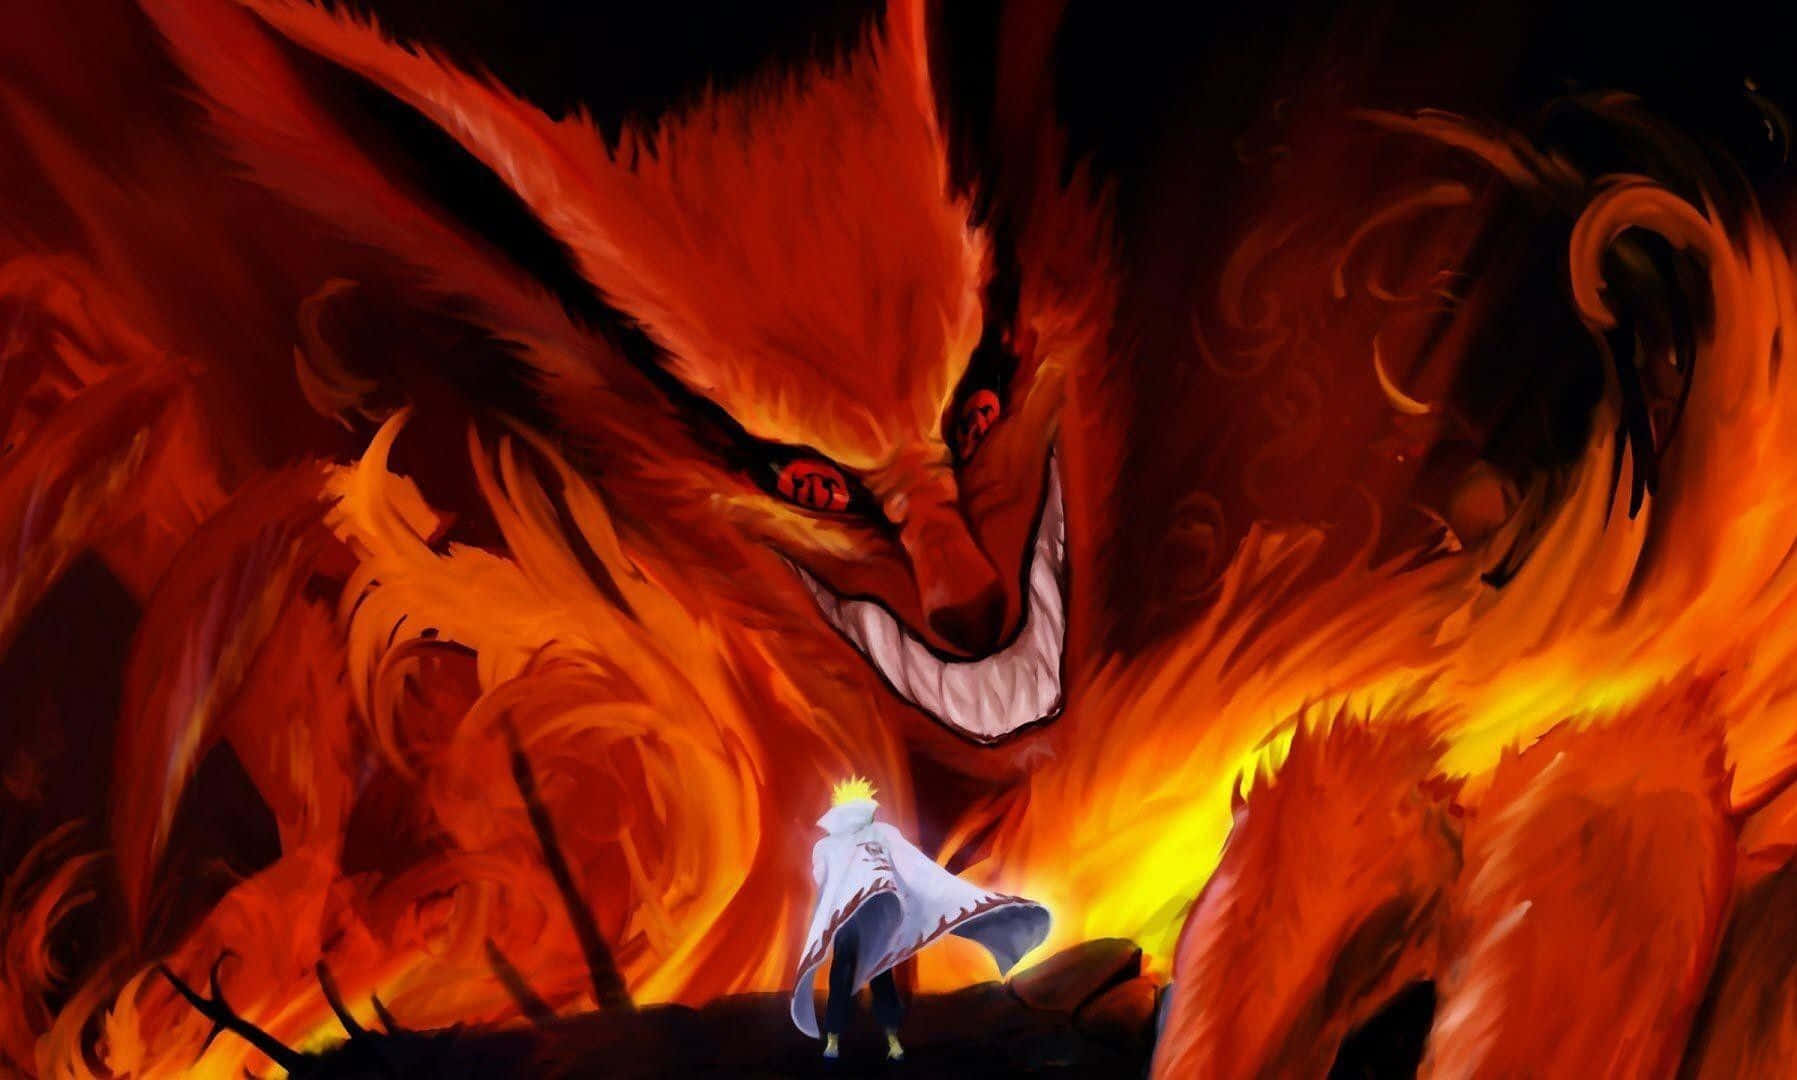 Observe the beauty of the mythical Nine Tailed Fox